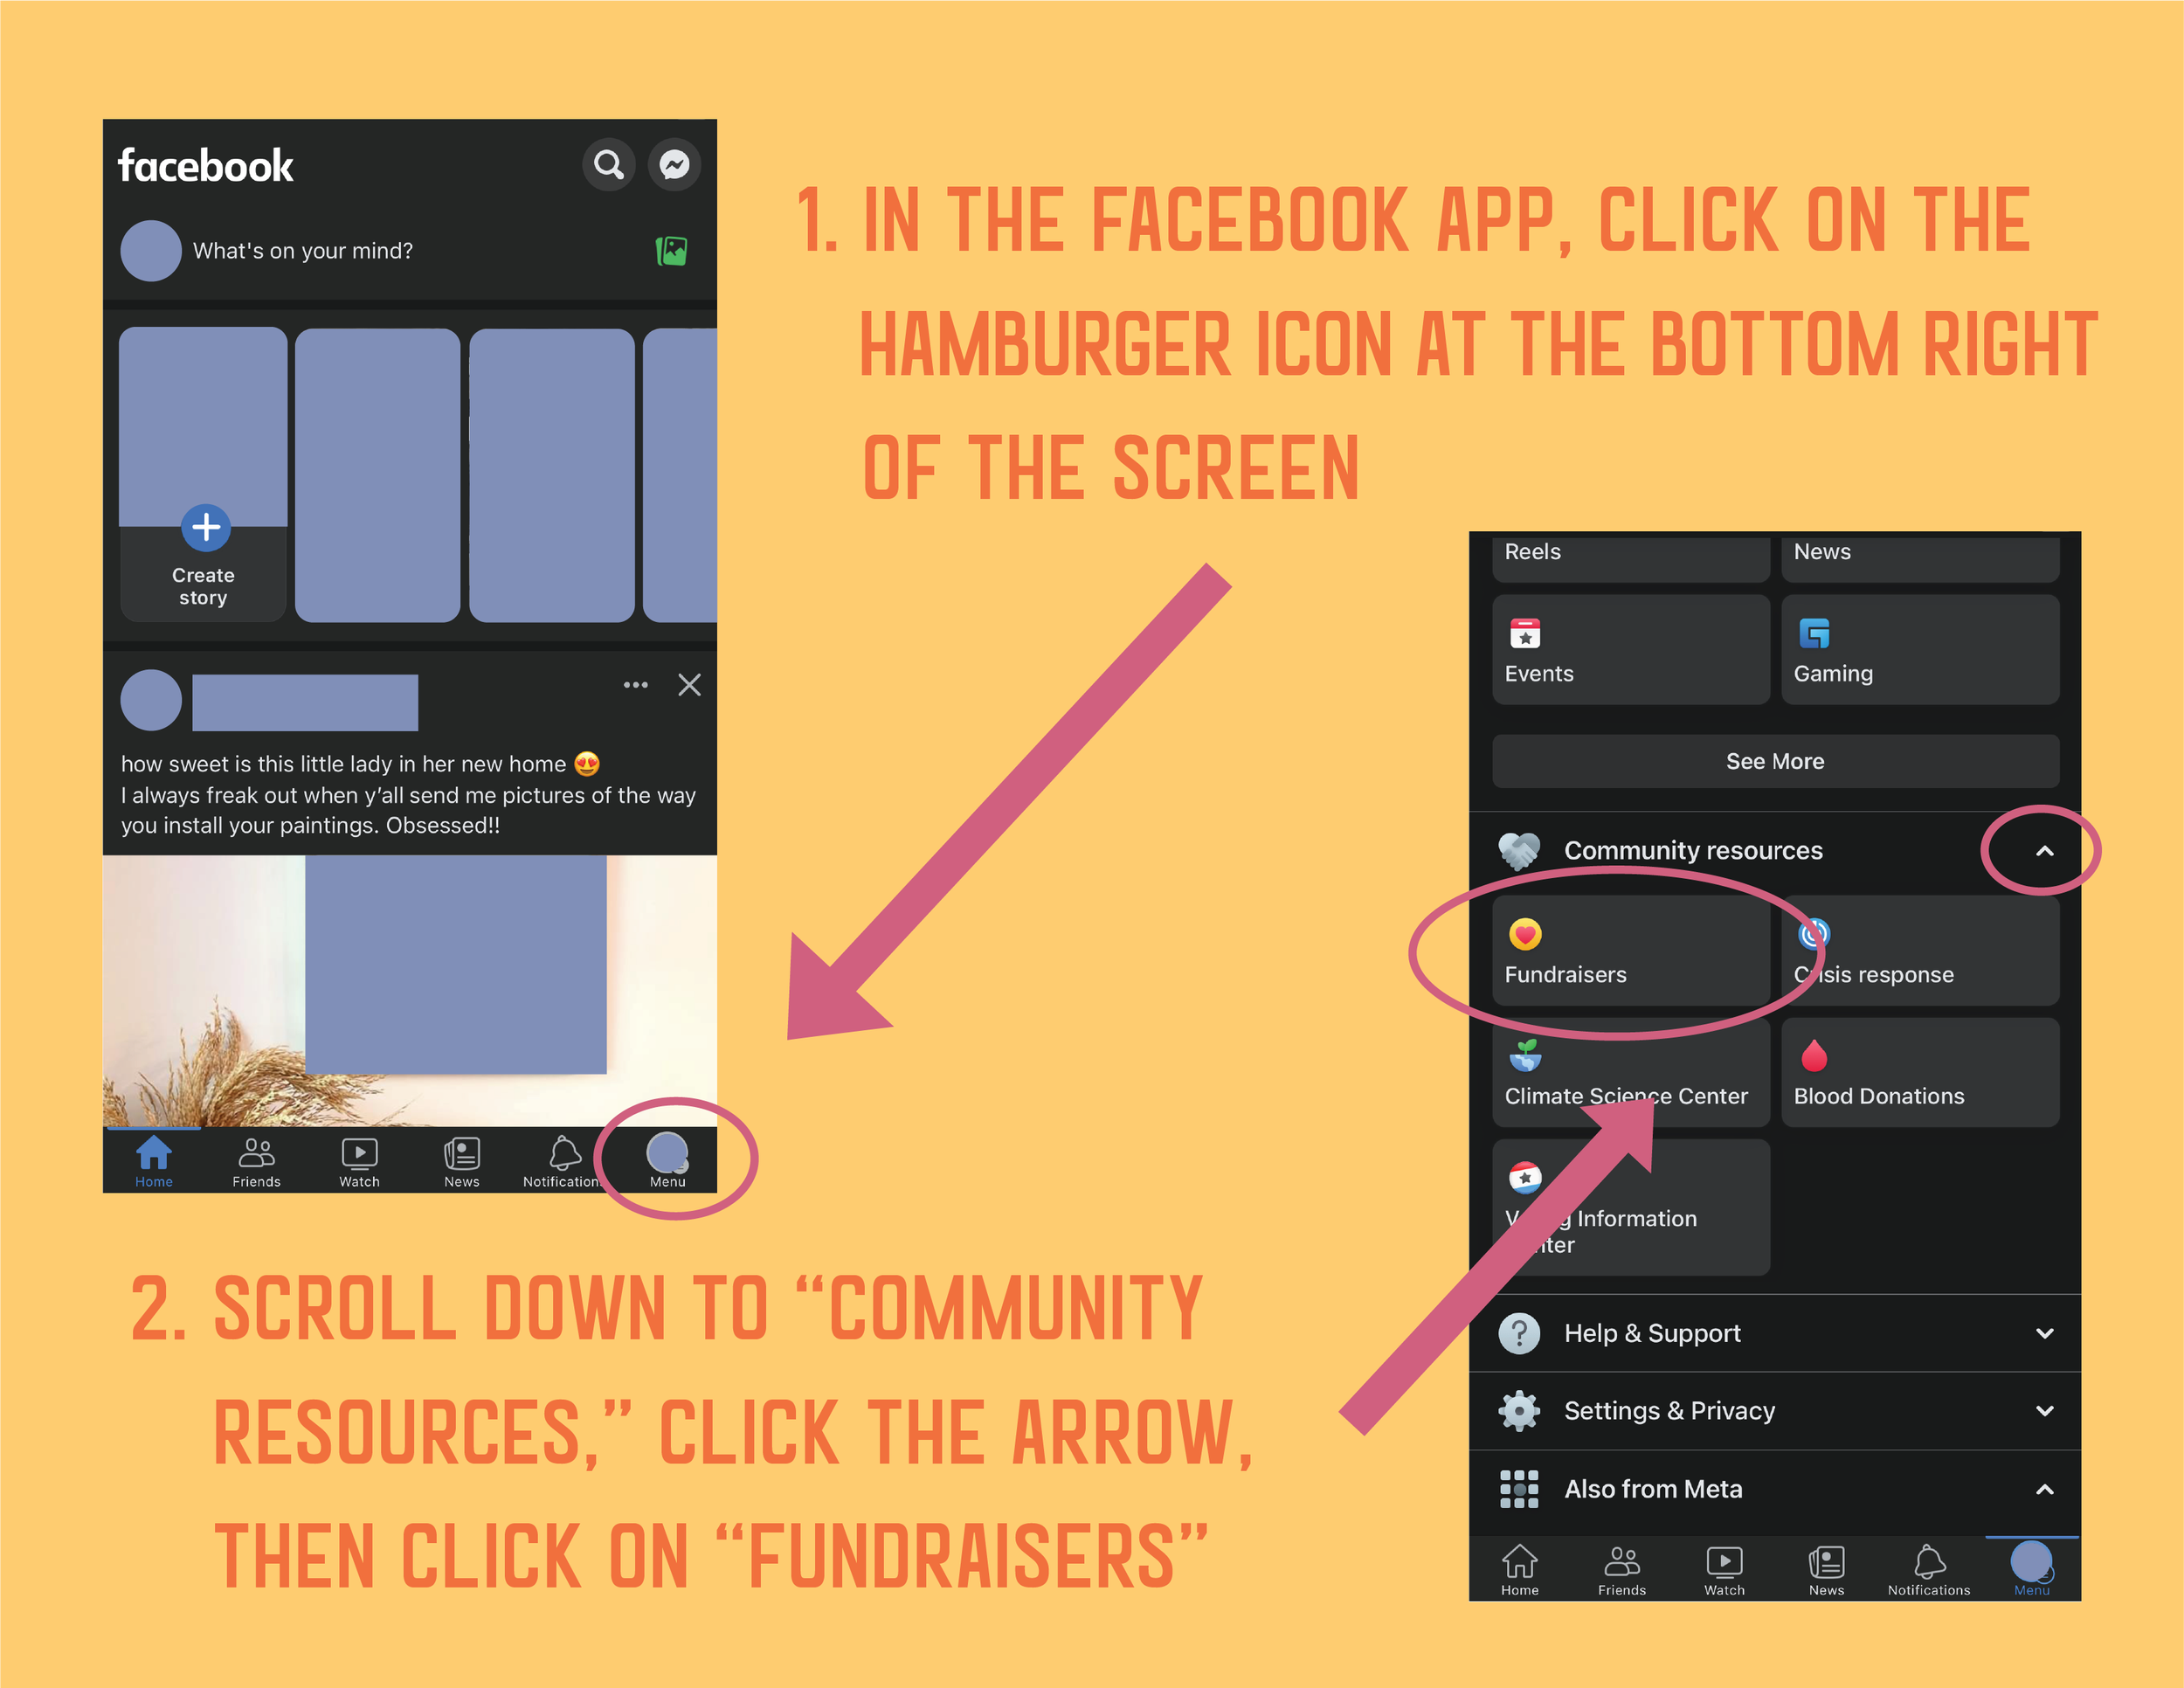 fb-fundraiser-guide-14.png